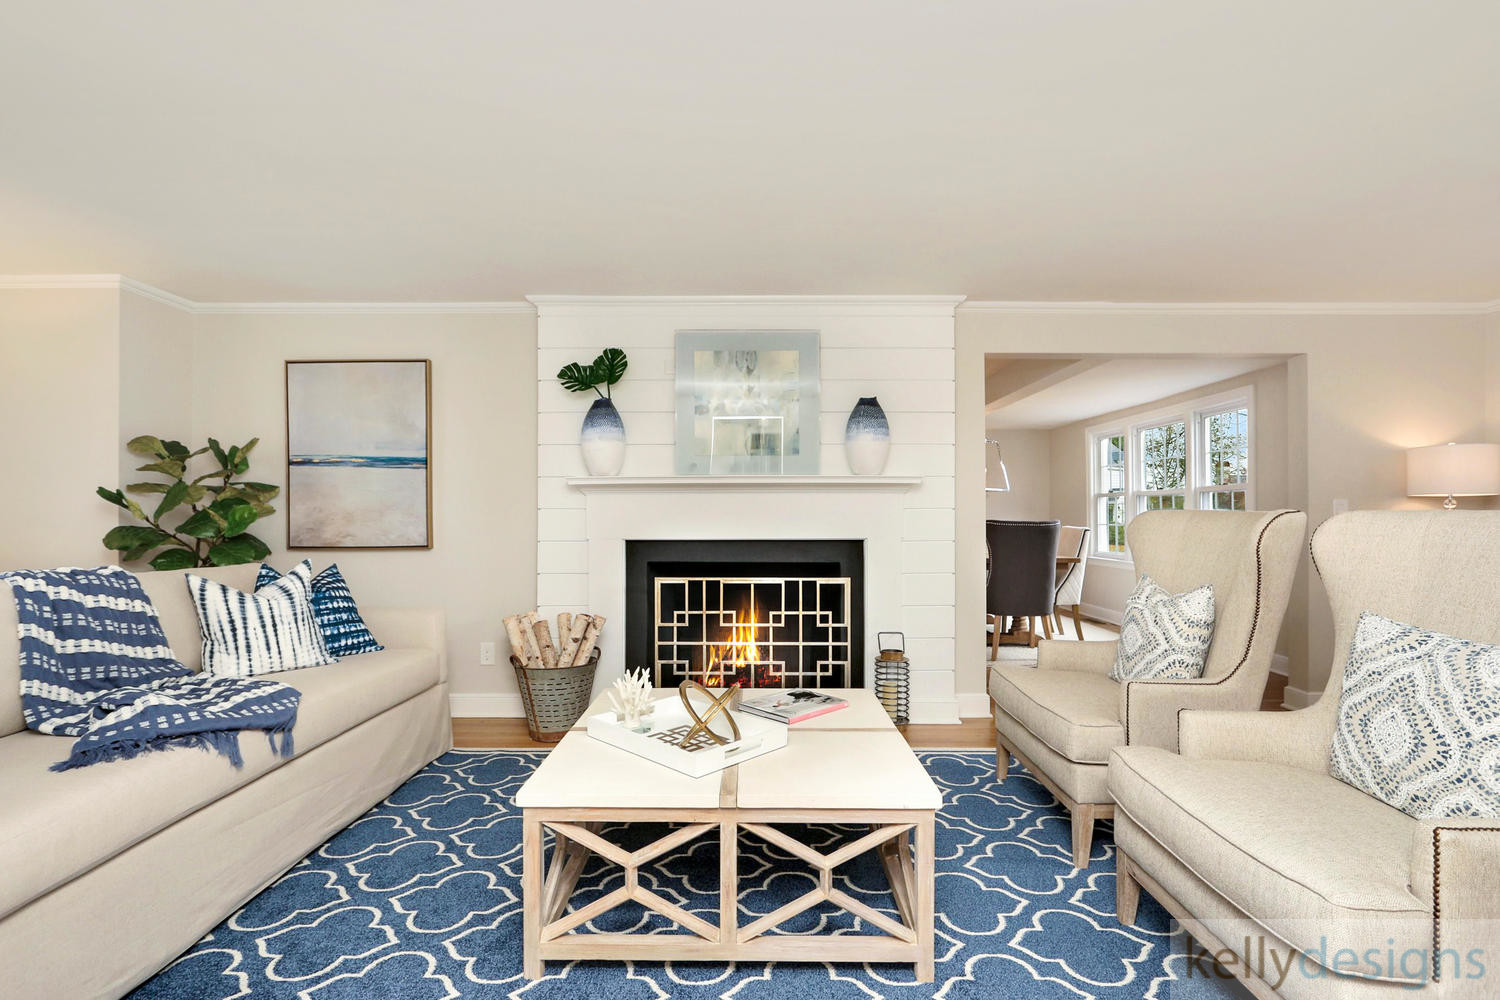 Staging A Sure Thing on Shoreham - Living Room- Home Staging By kellydesigns